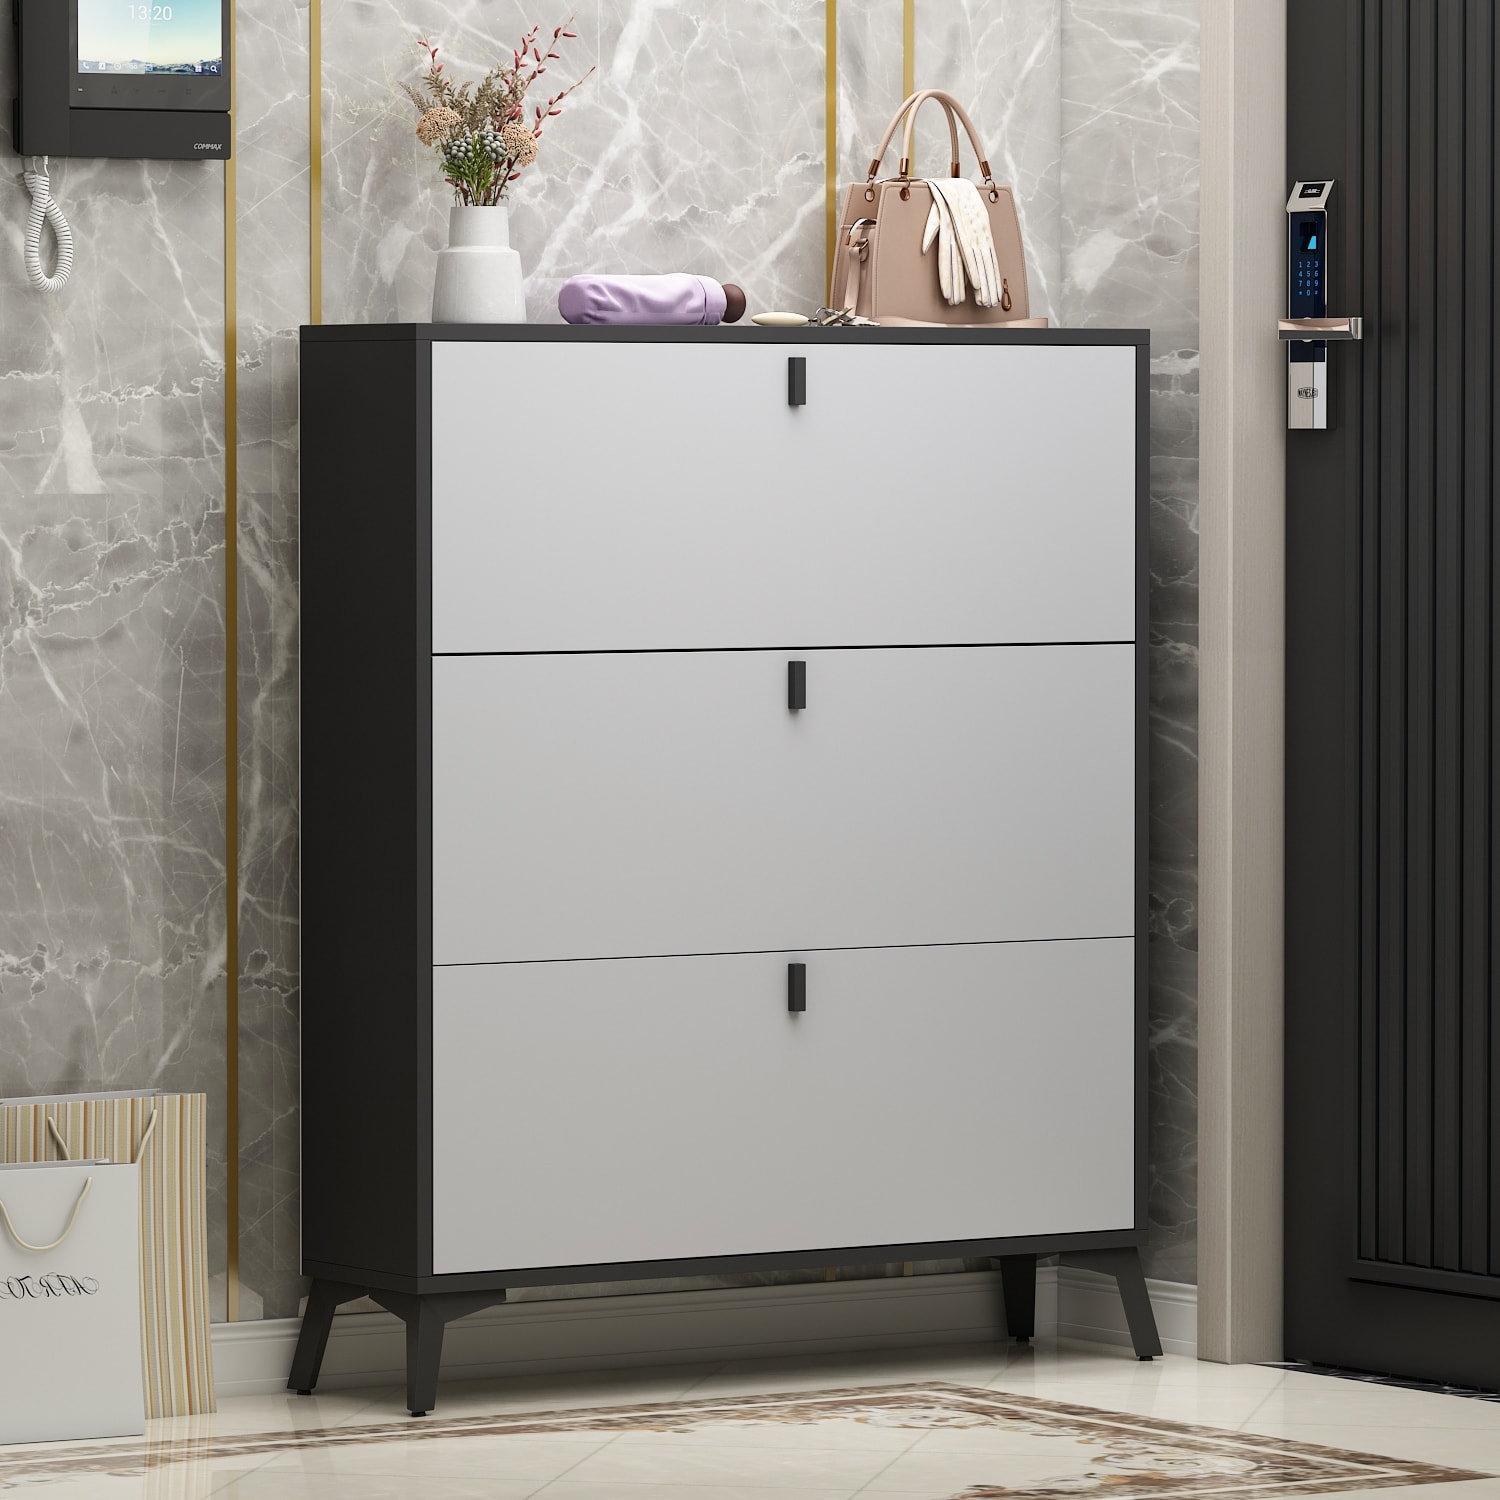 https://ak1.ostkcdn.com/images/products/is/images/direct/ccc4e954a6f022bd97547fb08be65db3588e3d66/FAMAPY-3-Drawer-Entryway-Shoe-Cabinet-Wood-Shoe-Storage-Drawer.jpg